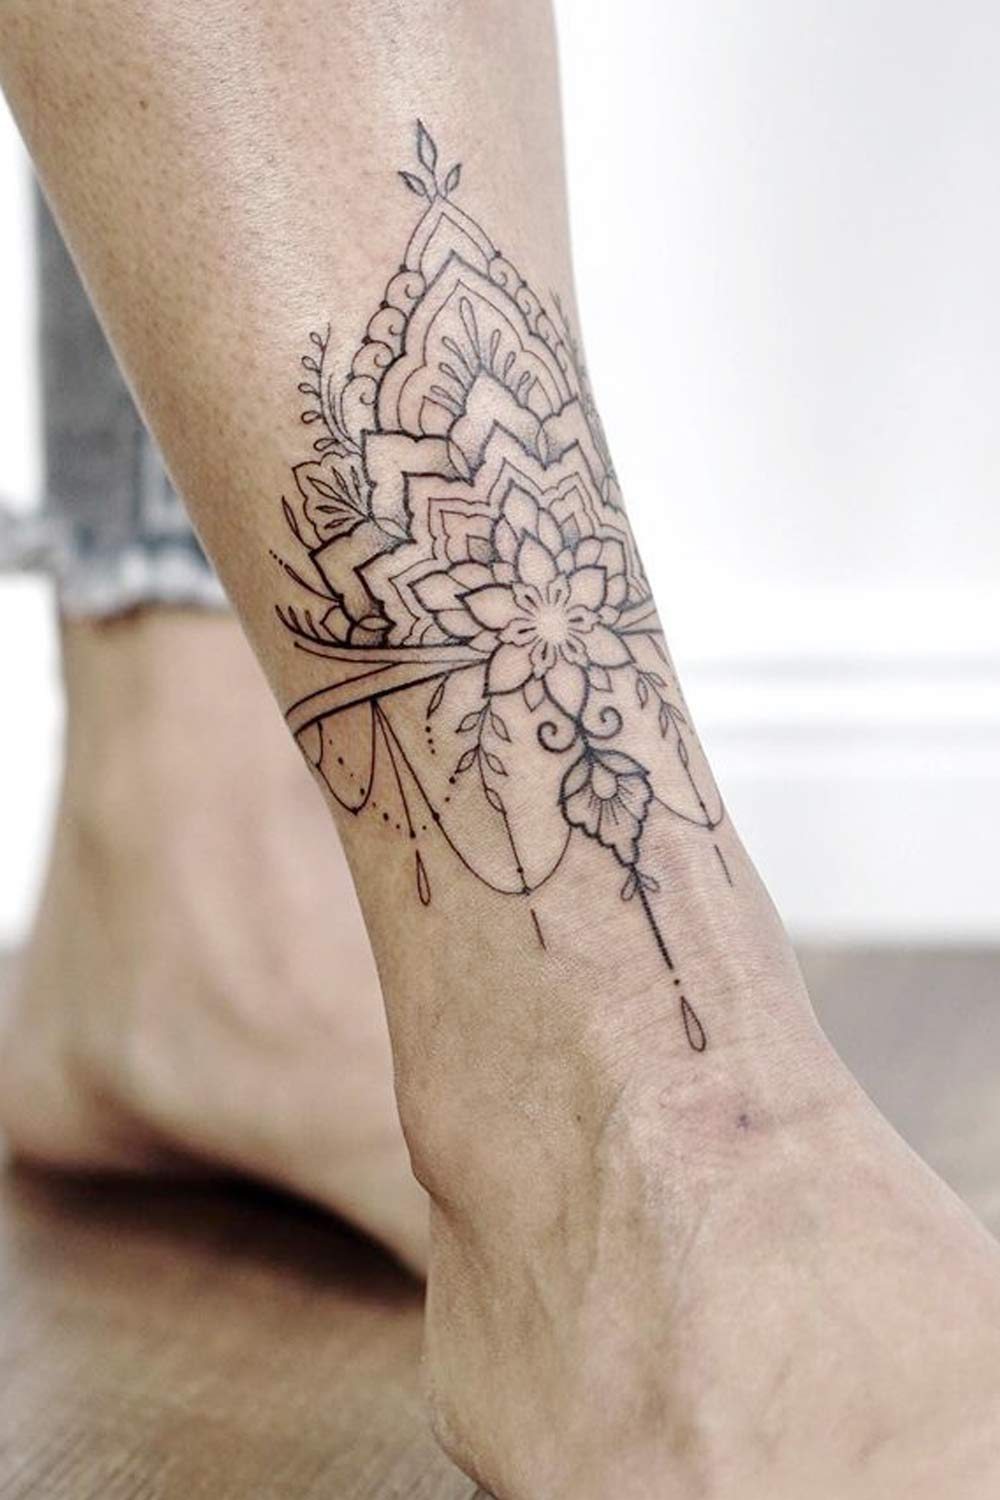 50 Beautiful Foot Tattoo Ideas: Get Inspired Now